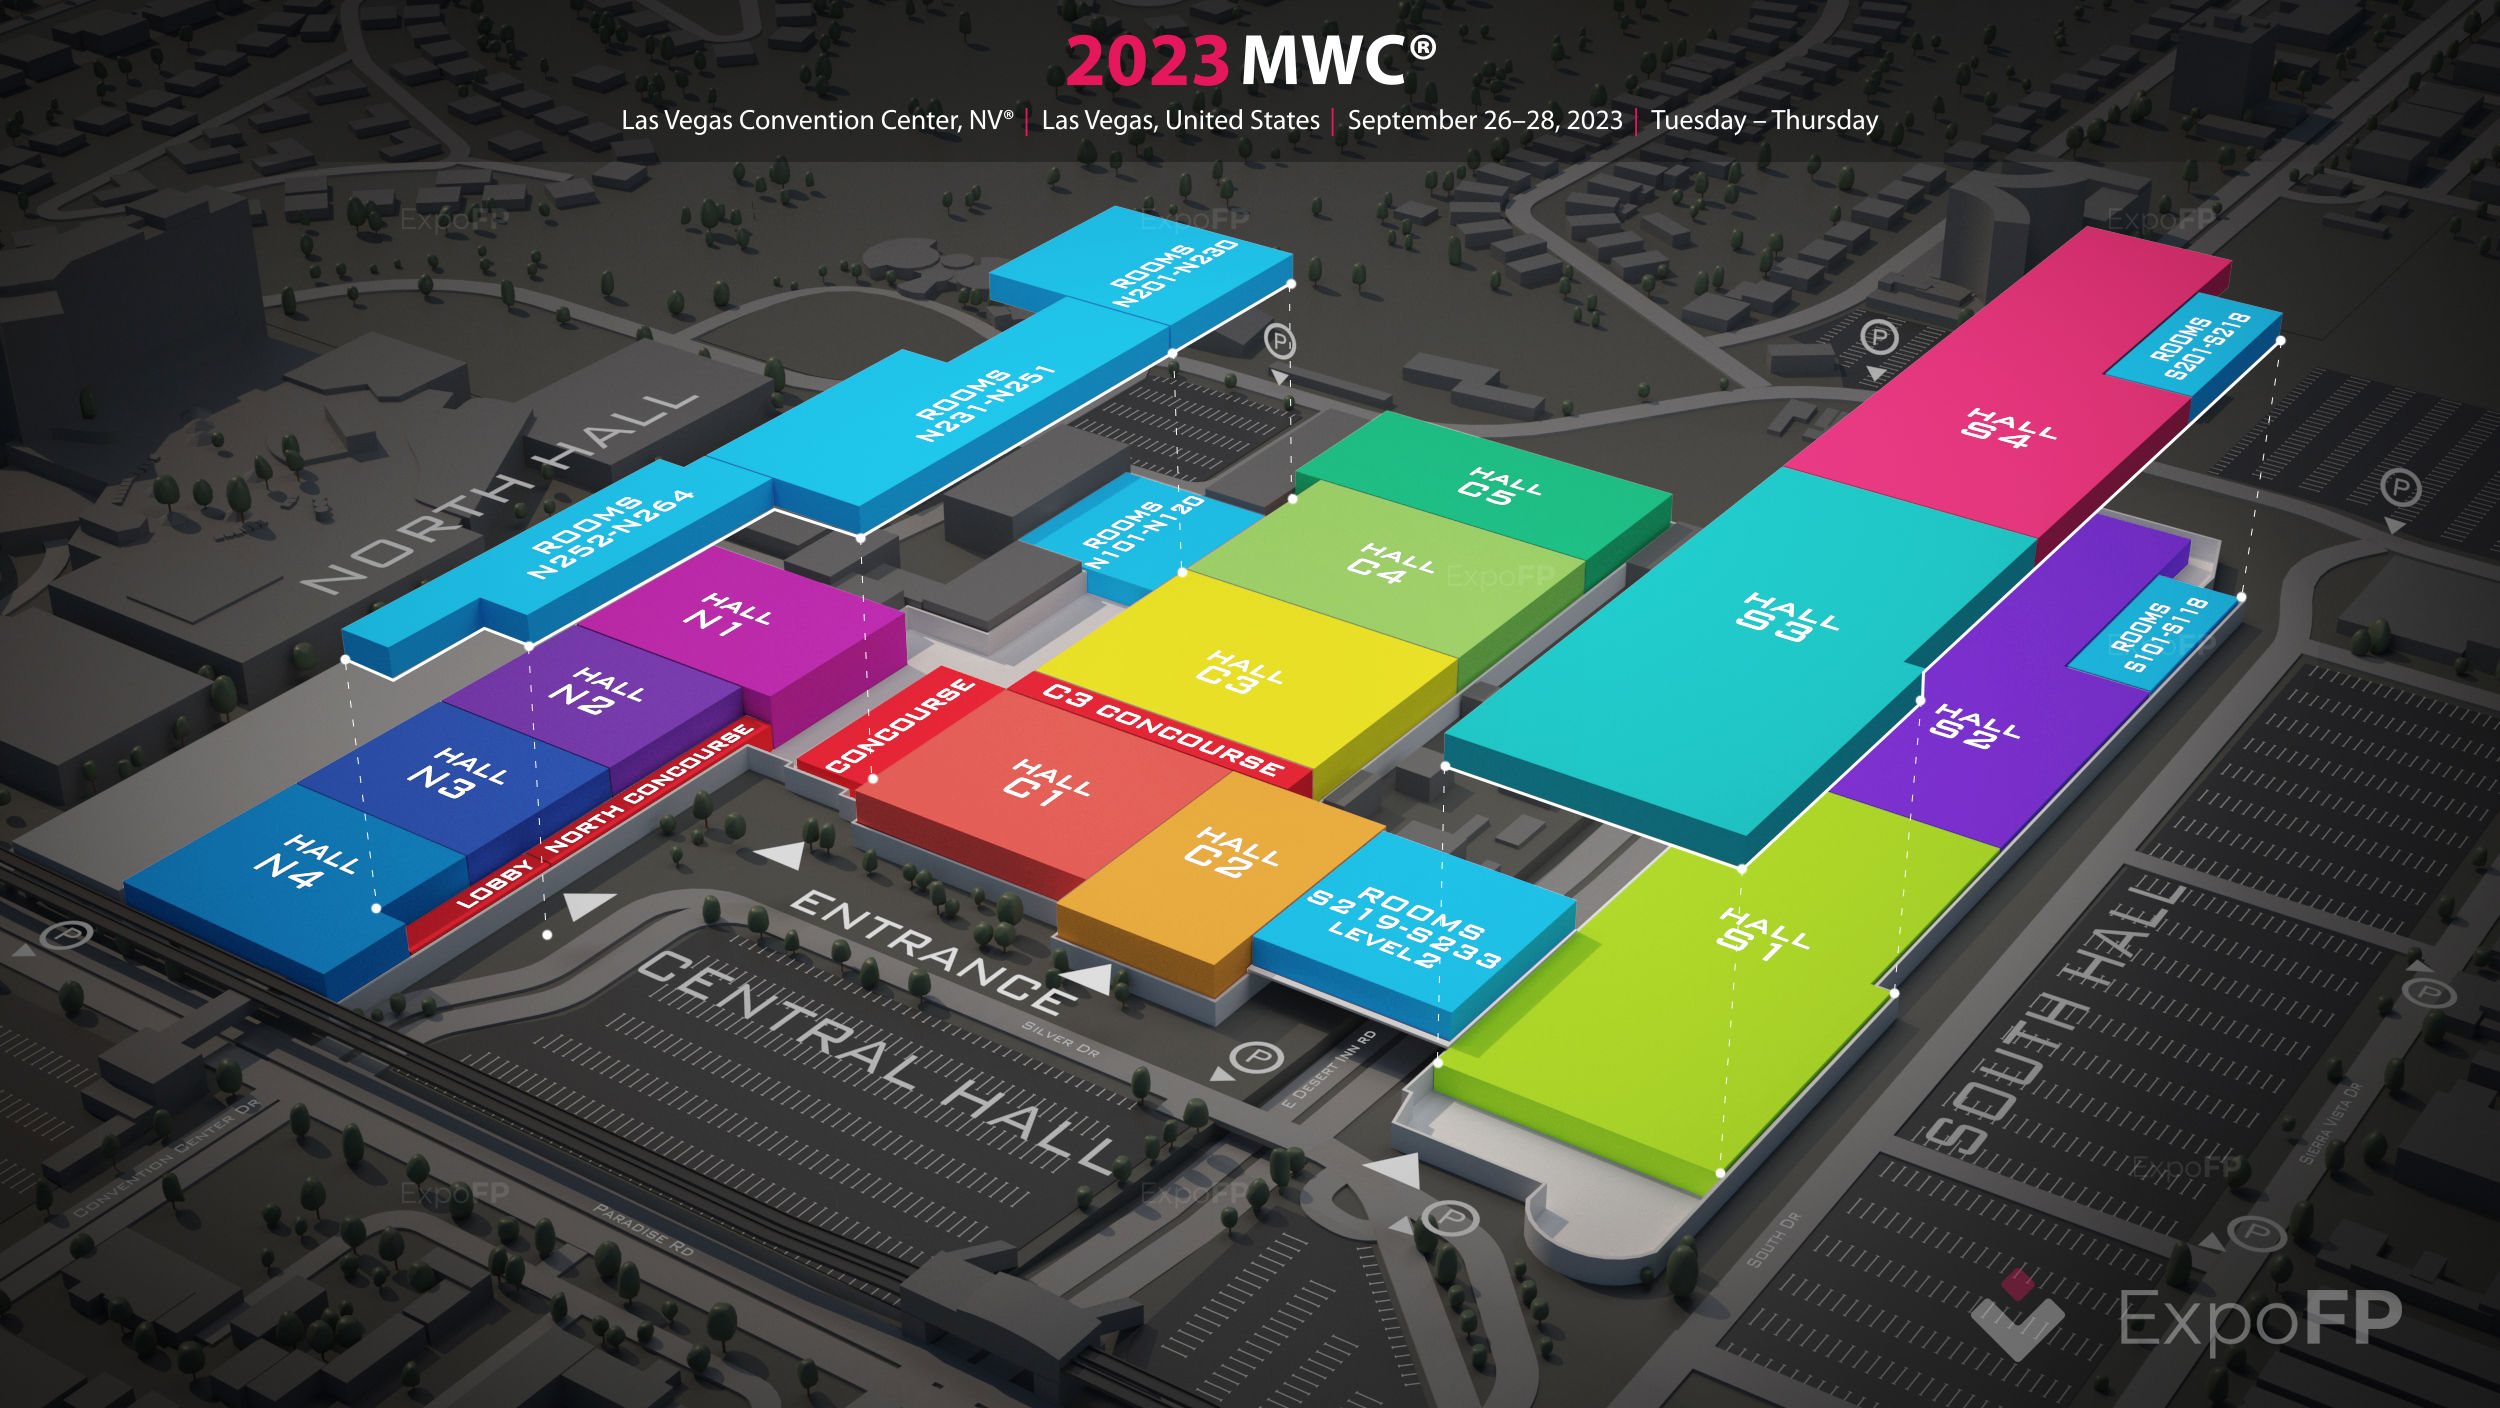 MWC 2023 in Las Vegas Convention Center, NV